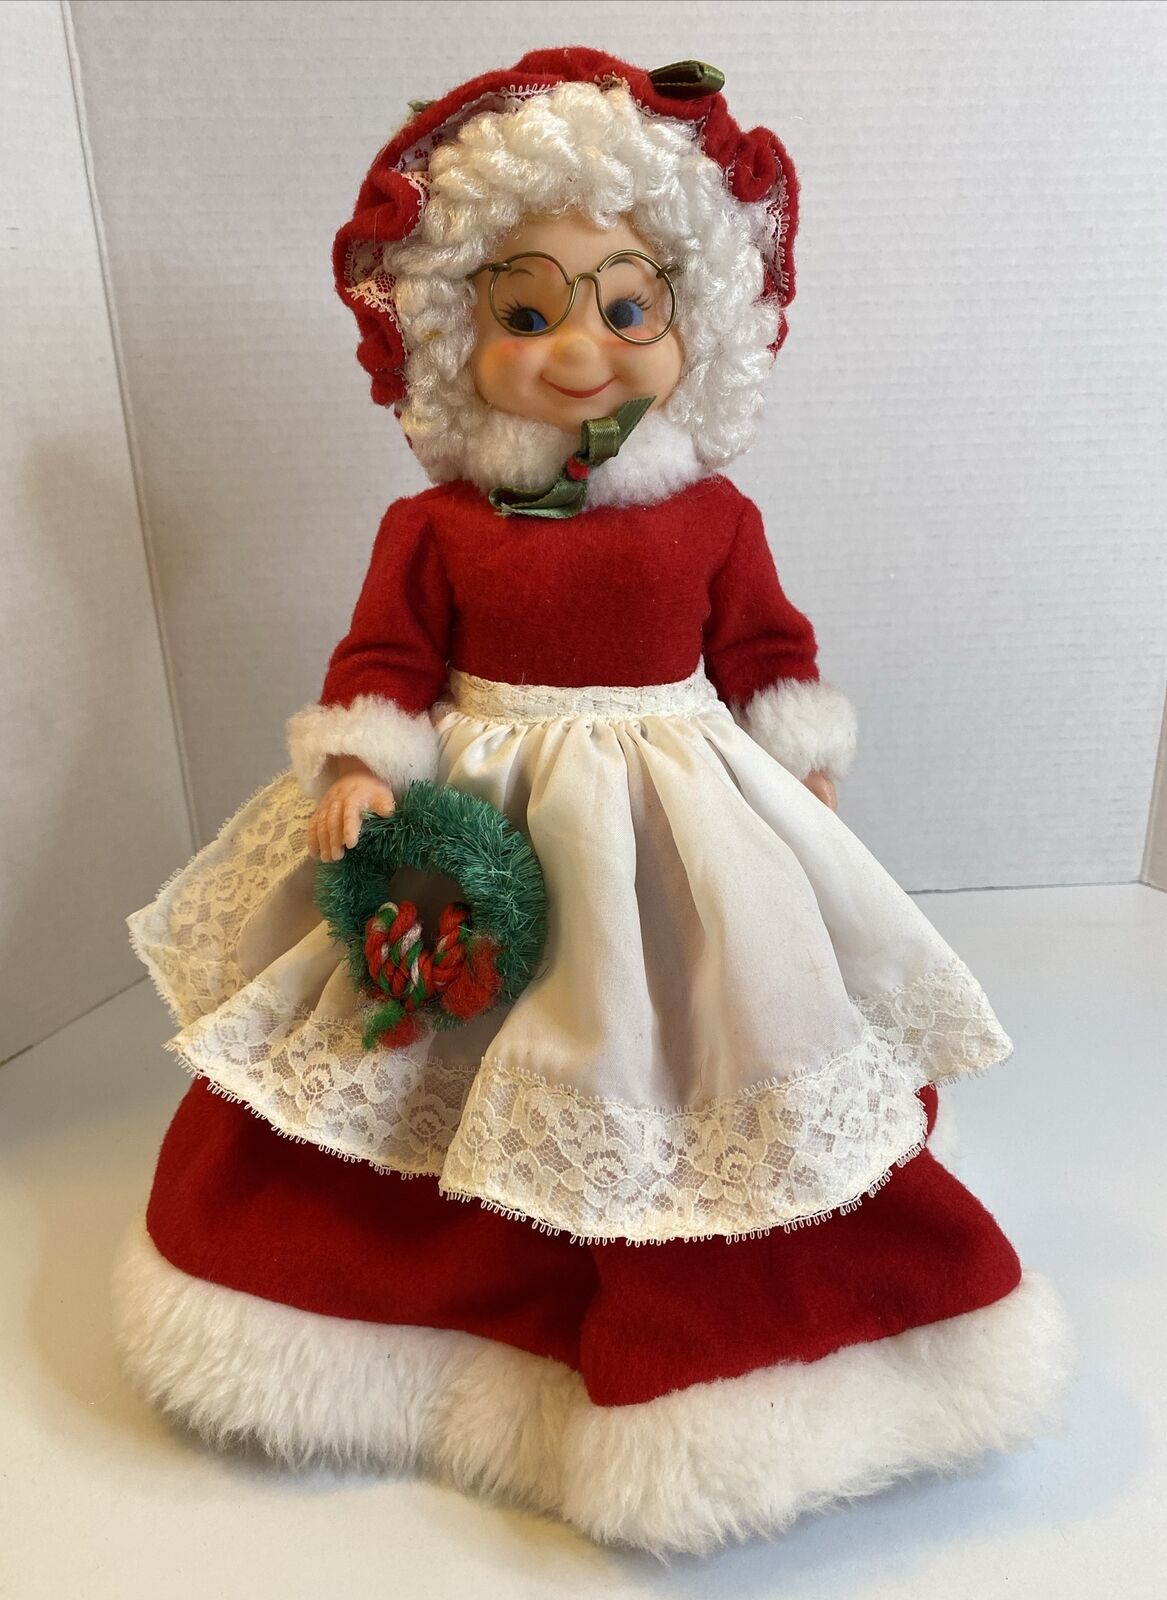 Vintage Mrs. Claus with Holly Wreath and Christmas Dress Hand Crafted 13”